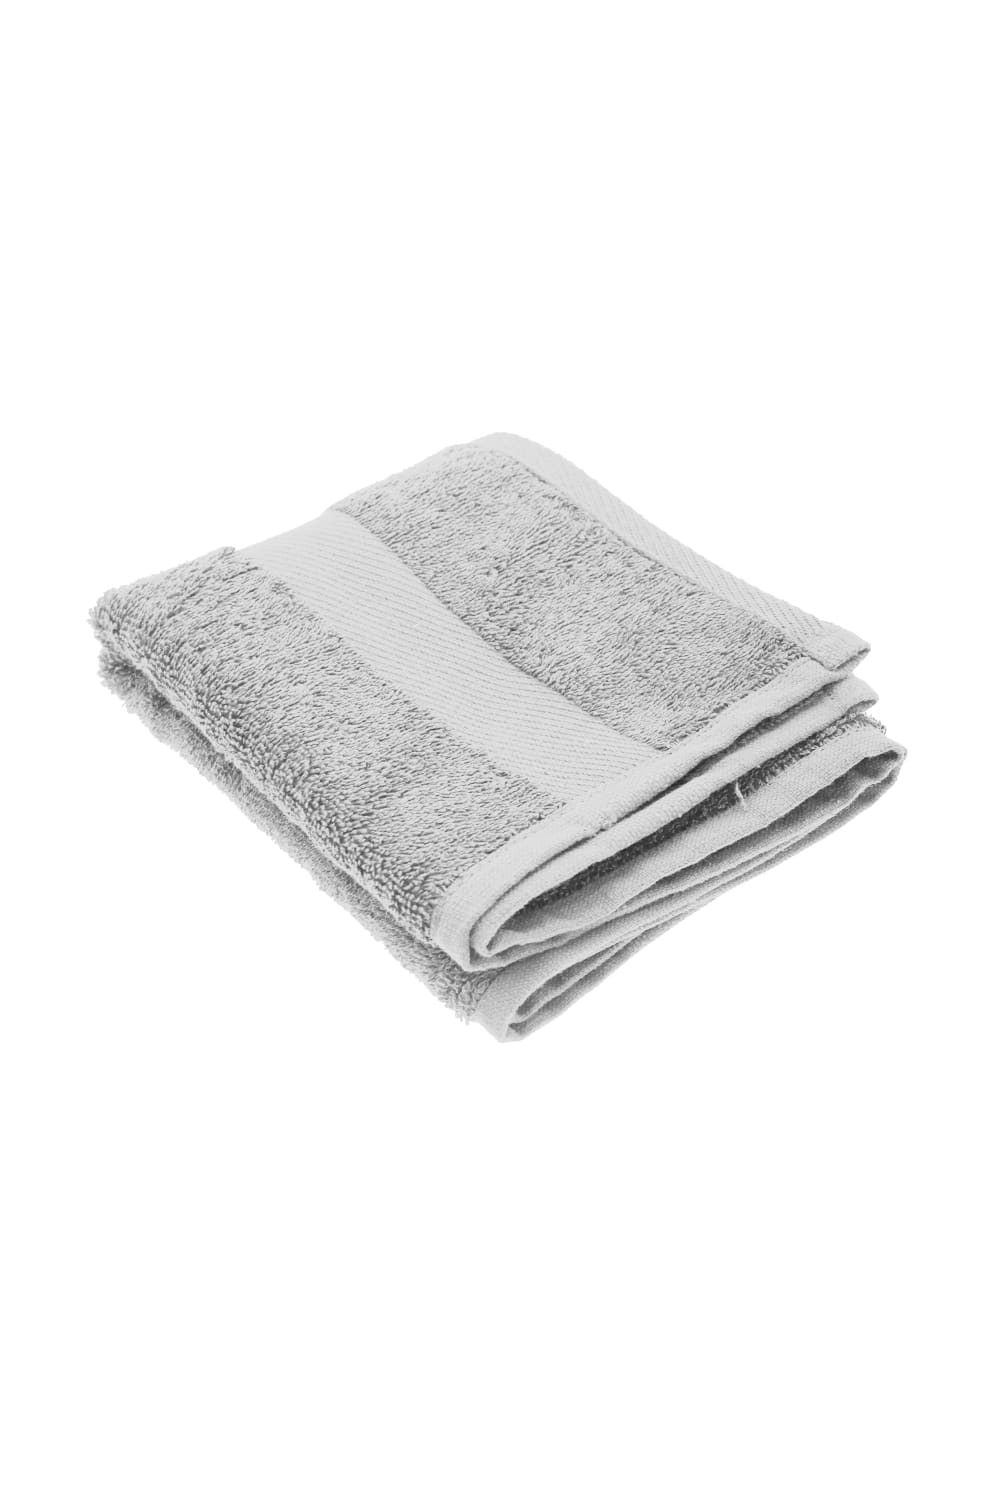 Jassz Premium Heavyweight Plain Guest Hand Towel 16 x 24 inches (Pack of 2) (White) (One Size)